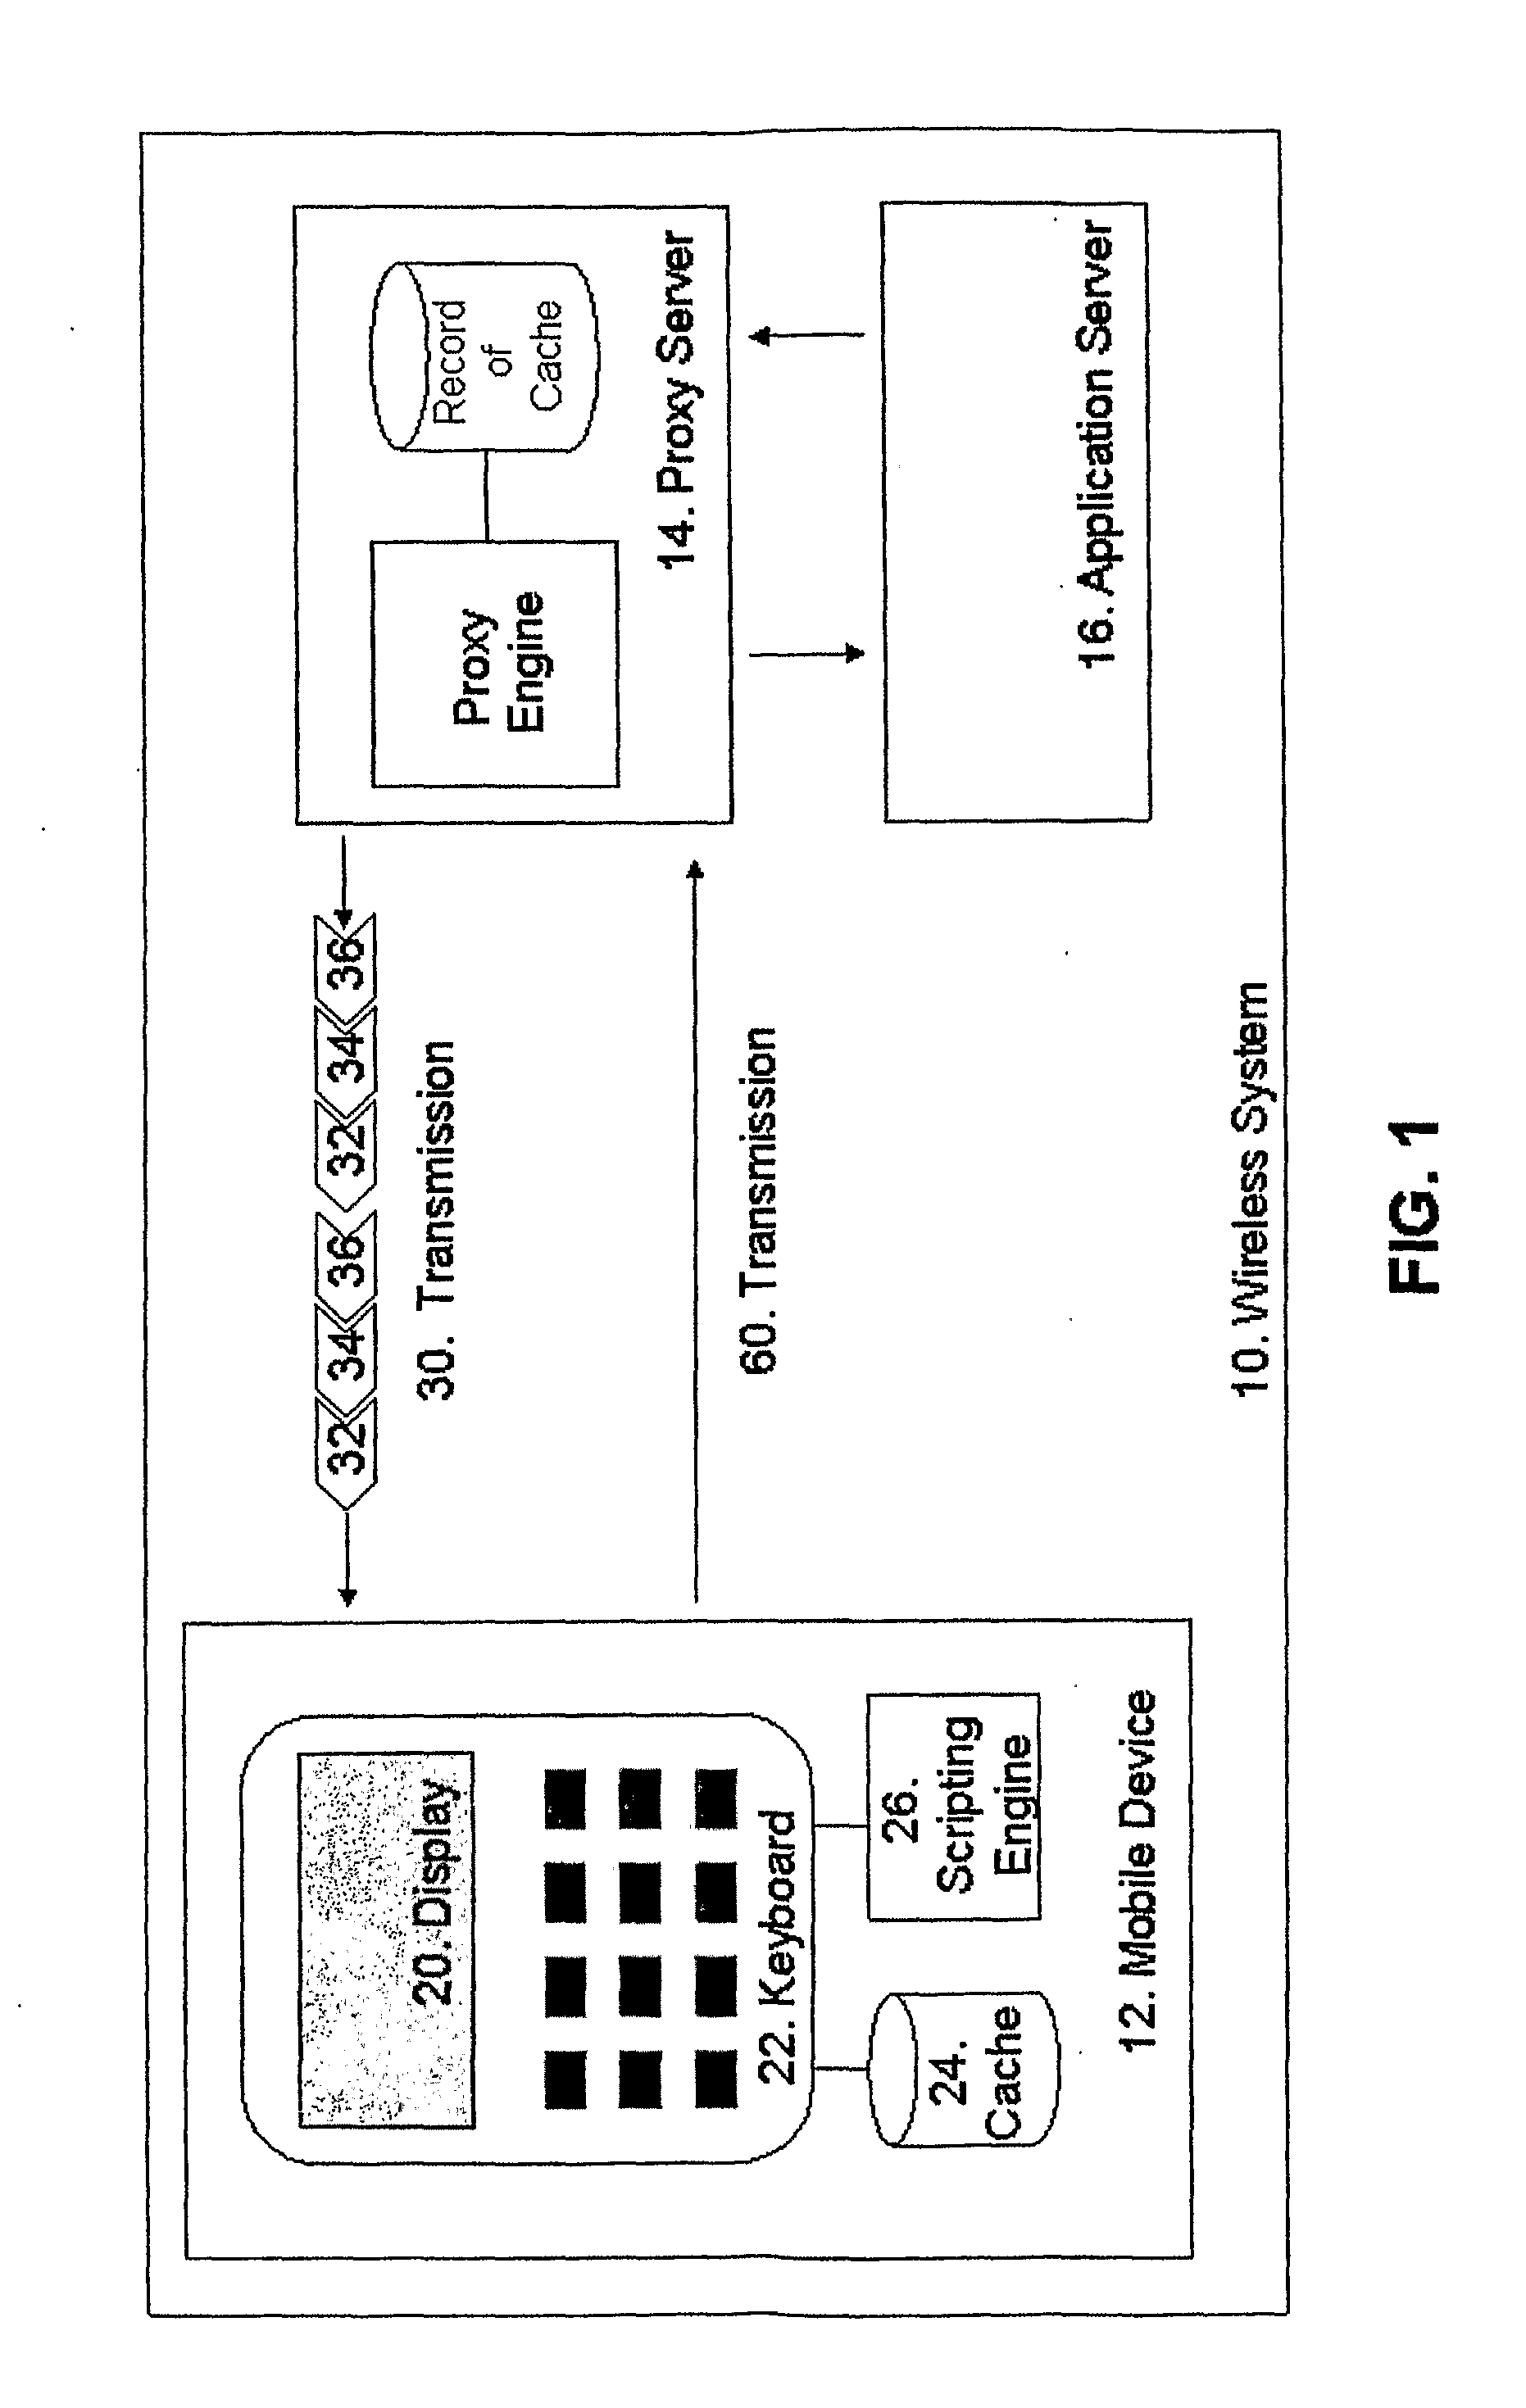 Systems, Methods, and Computer Readable Media for Providing Applications Style Functionality to a User